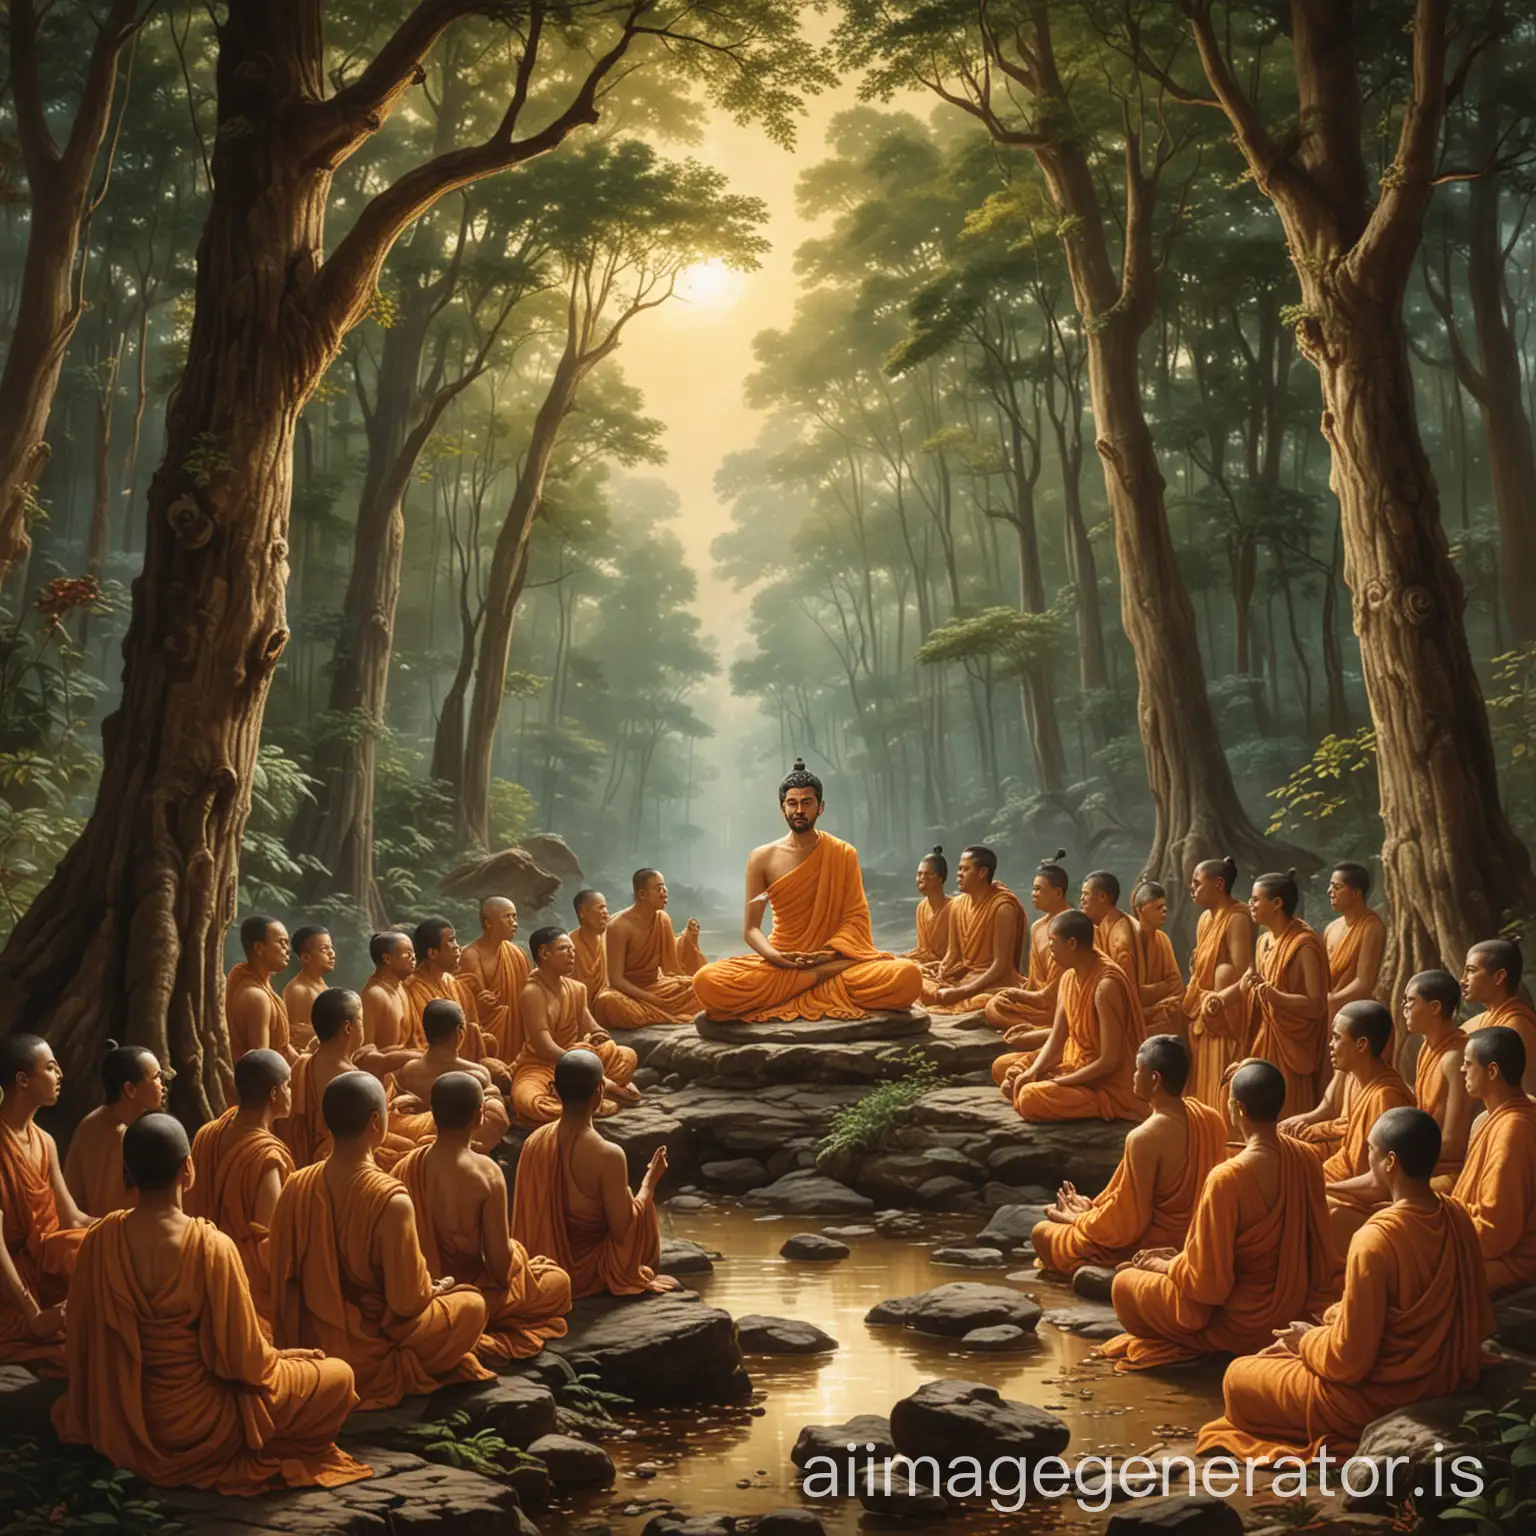 depiction of Siddhartha Gautama teaching to disciples in the forest, deep in thought.